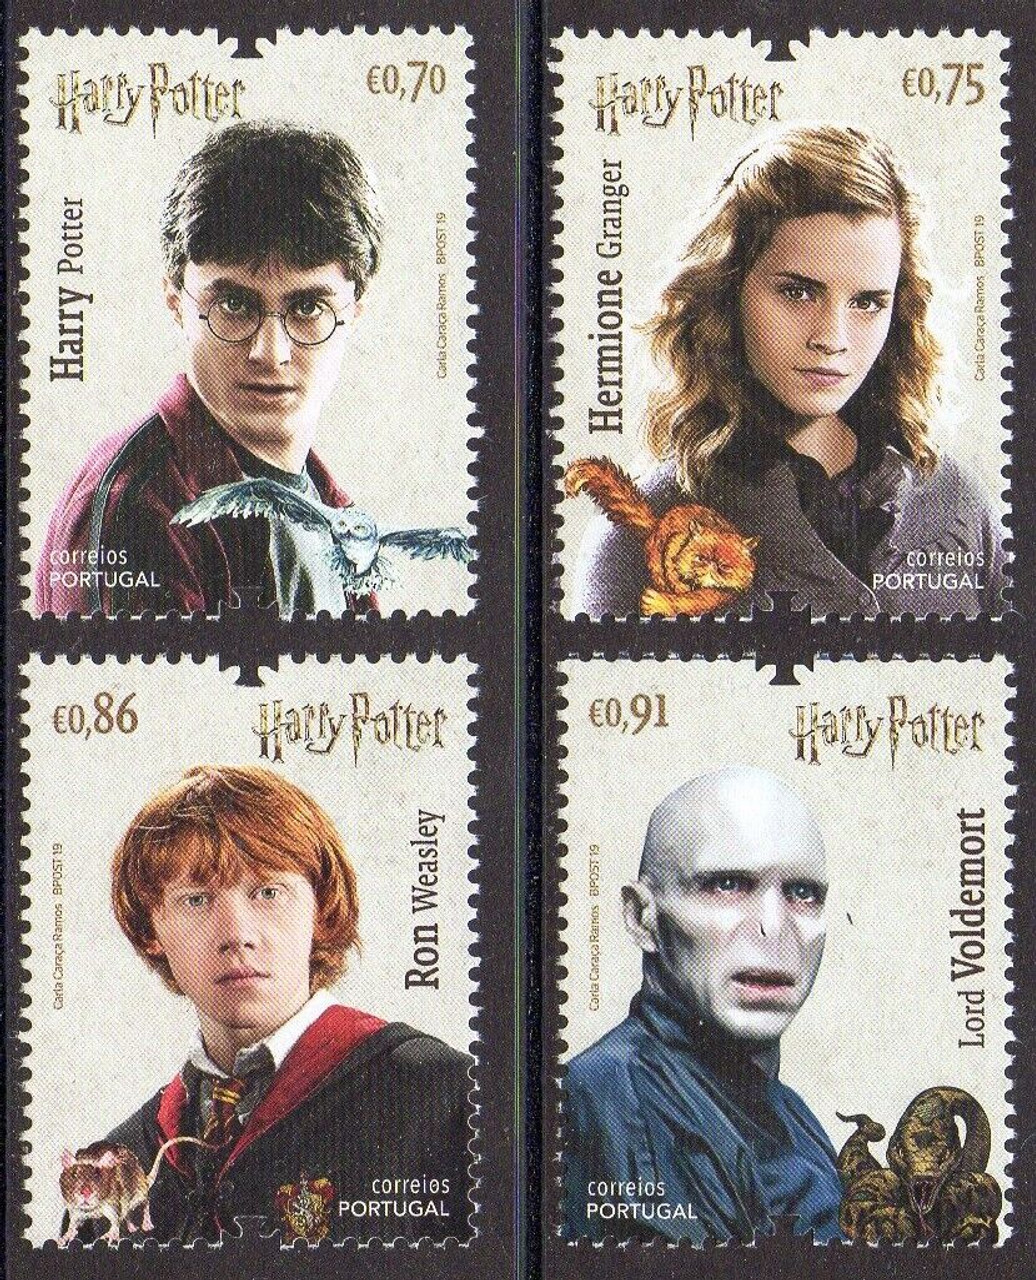 Portugal Post issued four stamps on Harry Potter! – World Stamp News